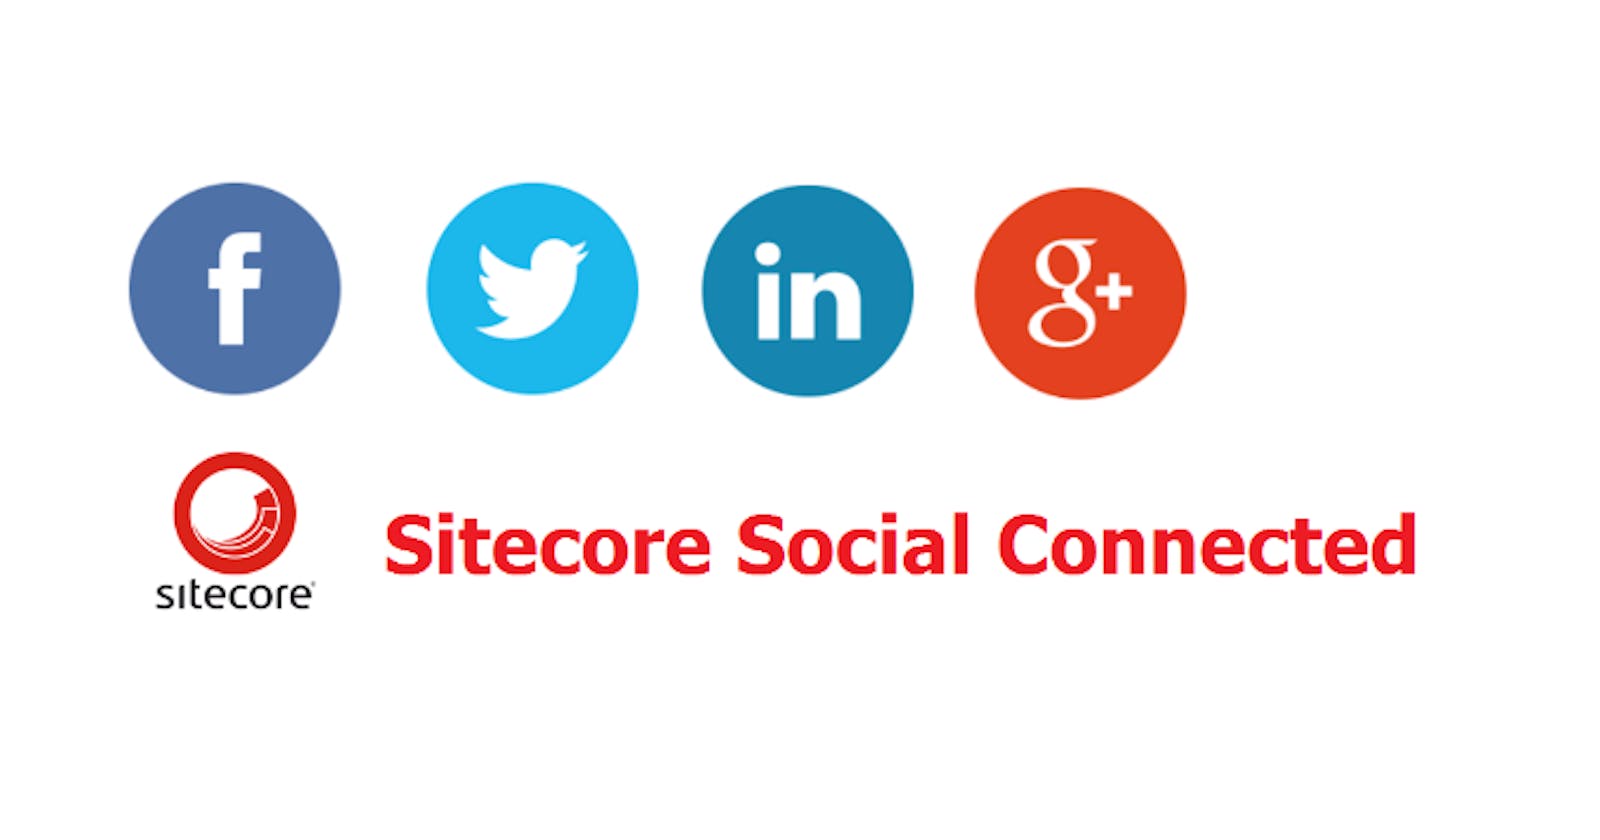 Sitecore Social Connected Exception: "Application in args should not be null"